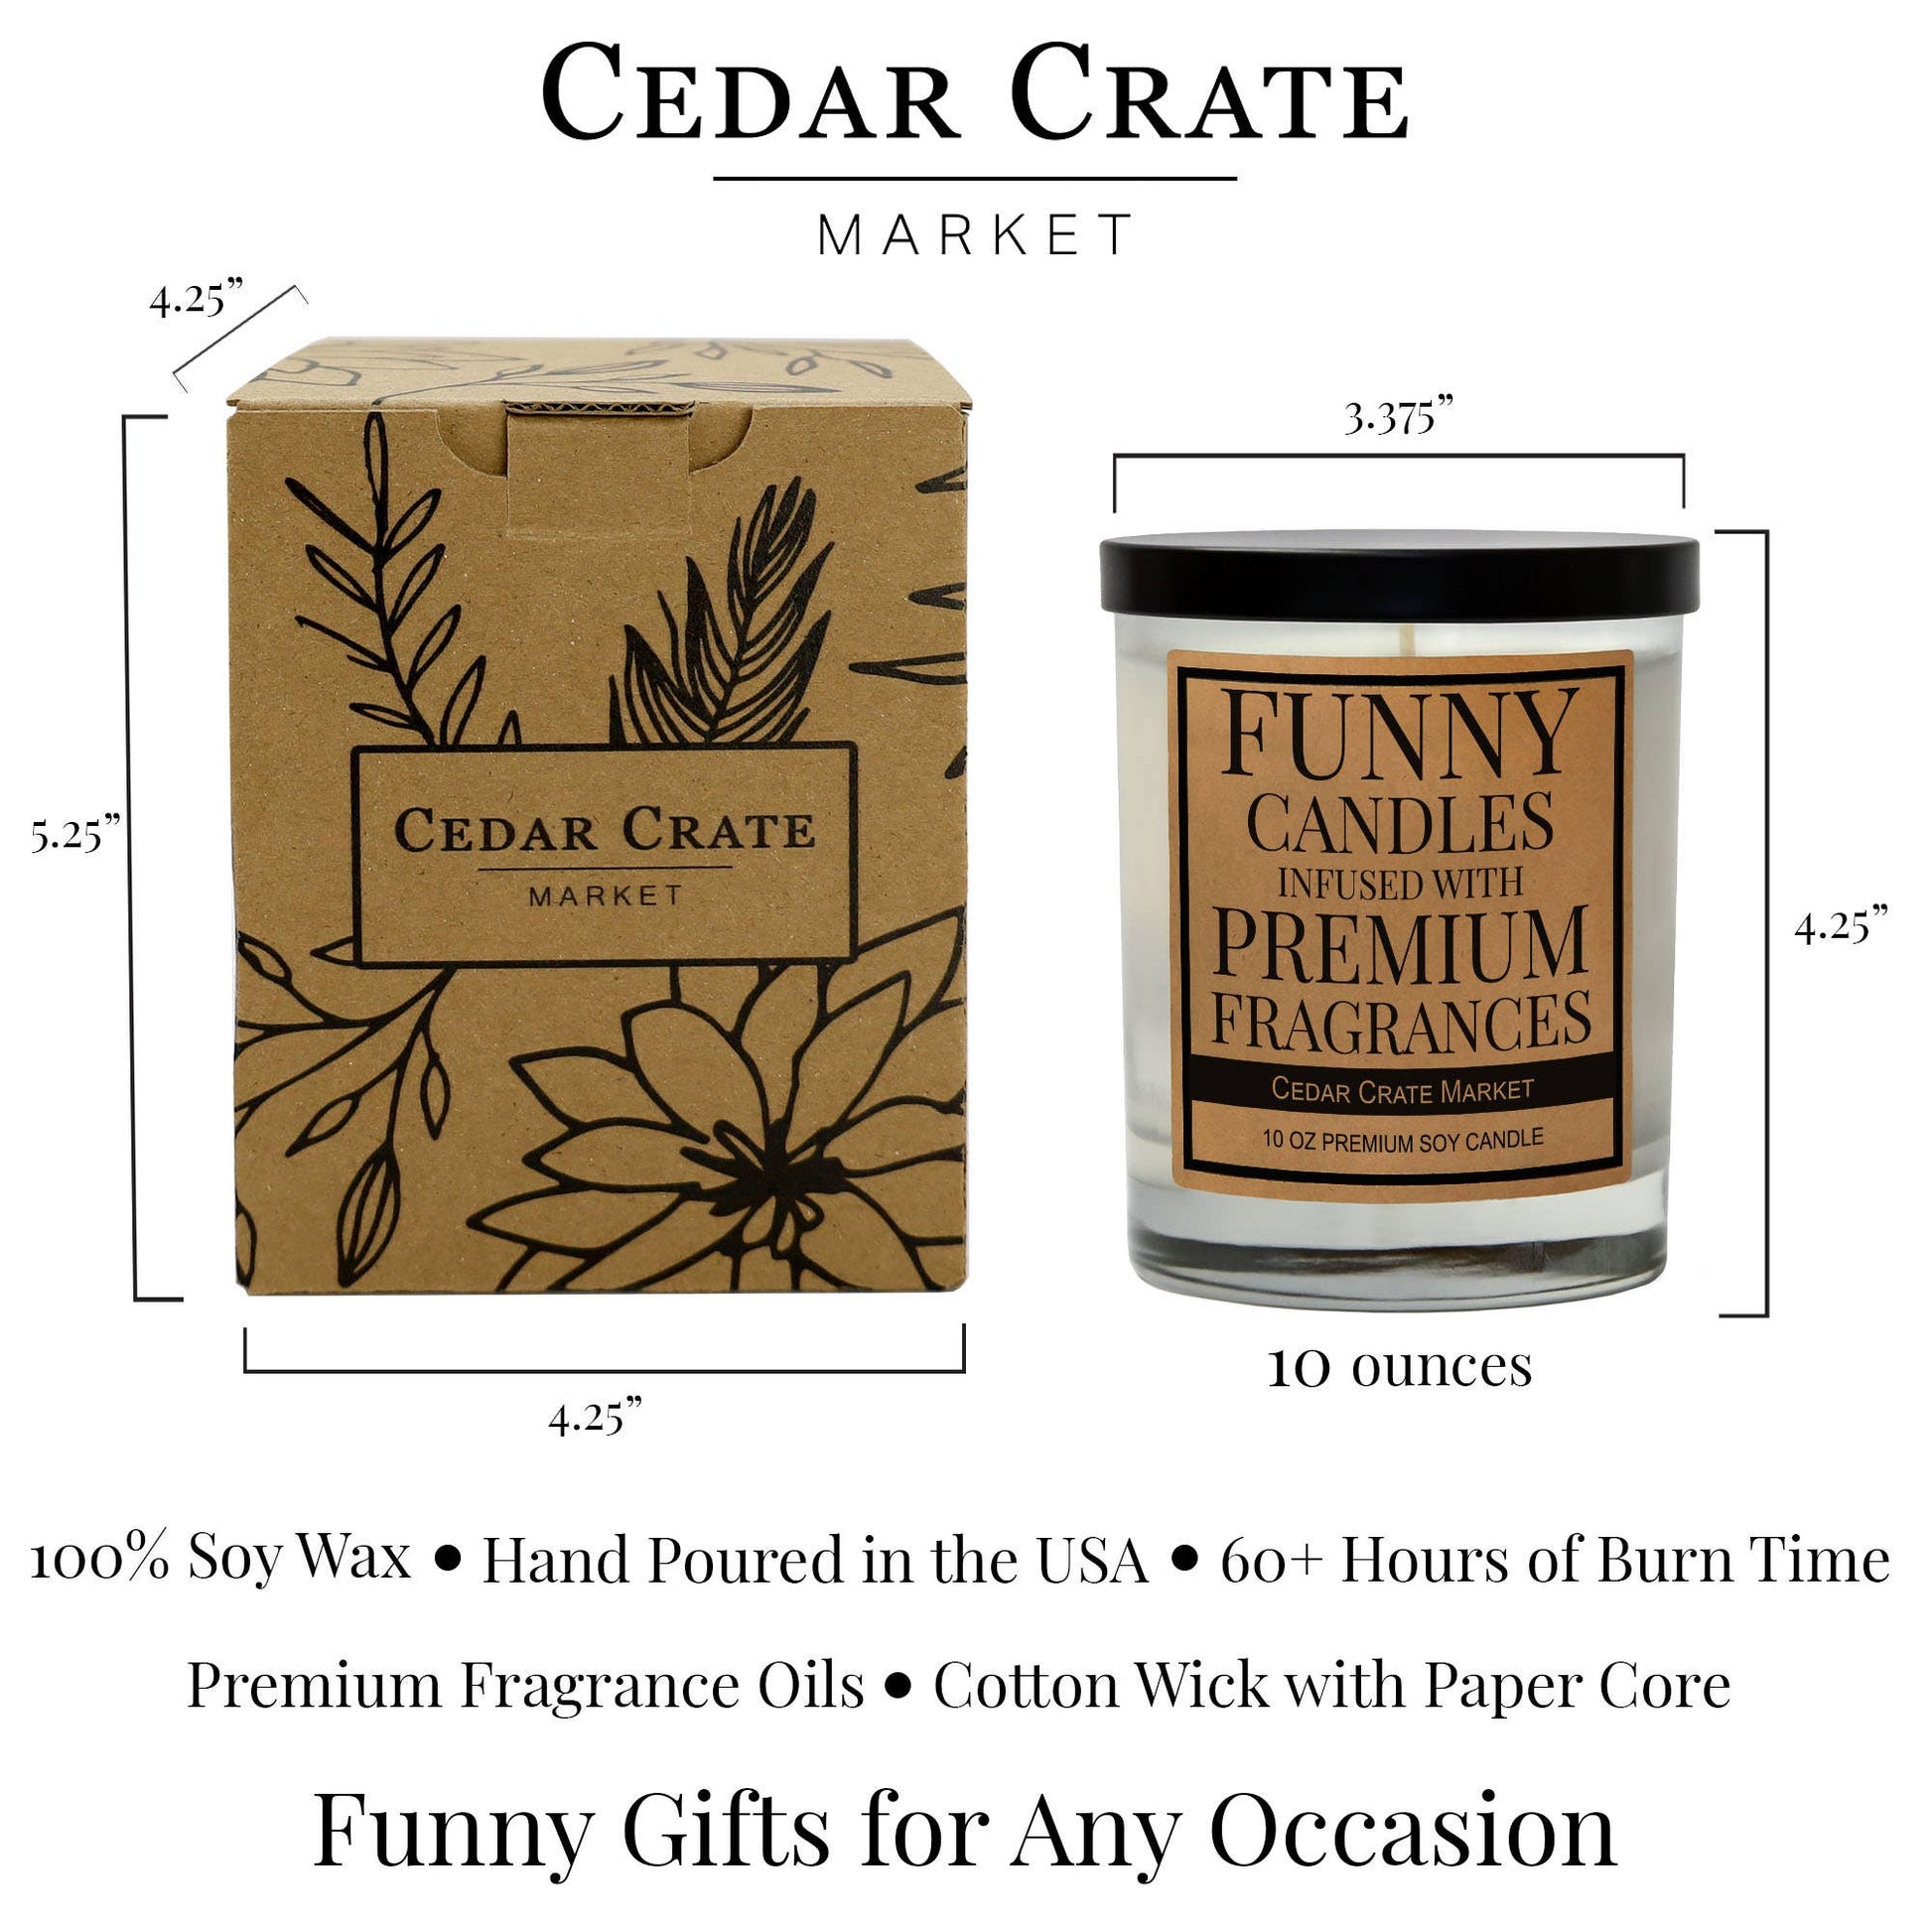 My Favorite Child Gave Me This Candle Soy Candle Core Cedar Crate Market